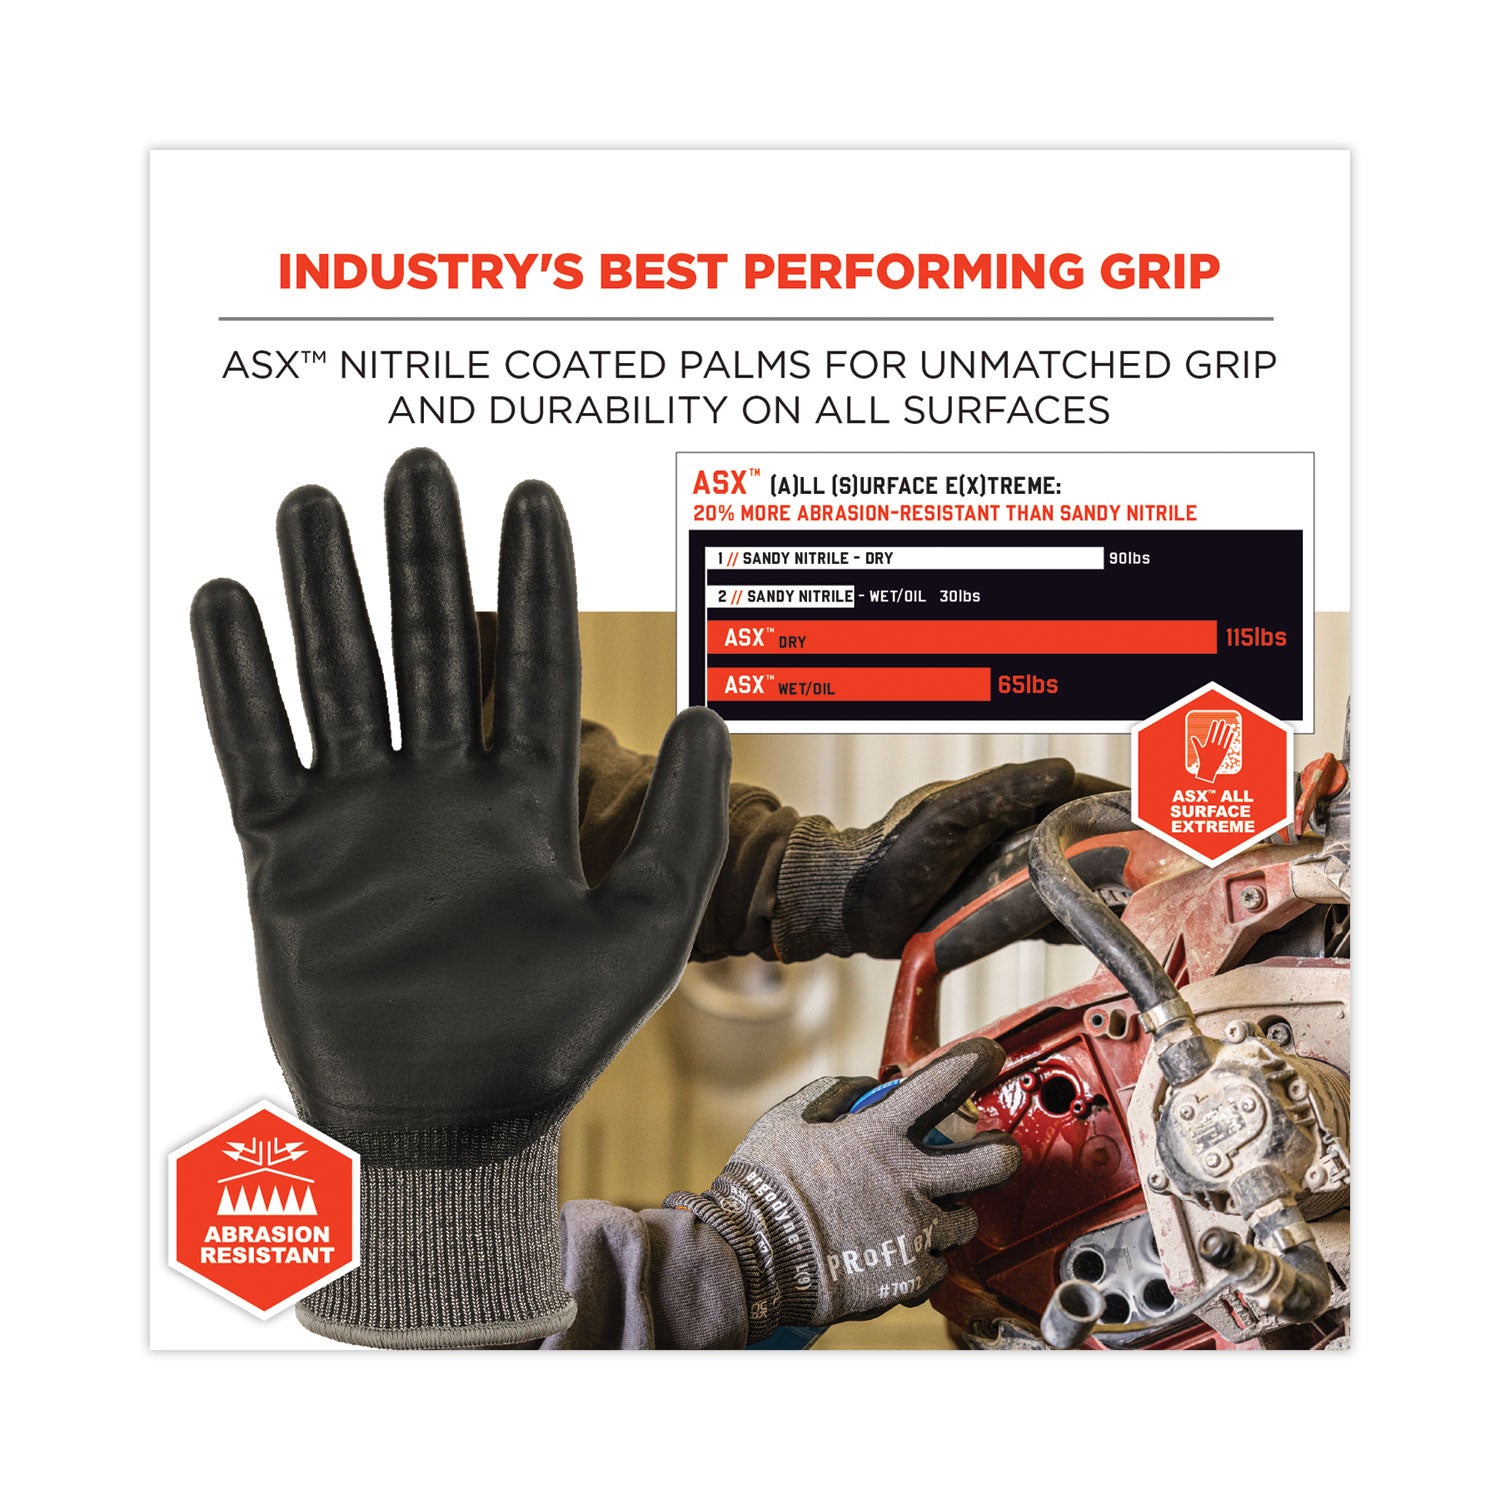 proflex-7072-ansi-a7-nitrile-coated-cr-gloves-gray-small-pair-ships-in-1-3-business-days_ego10312 - 7